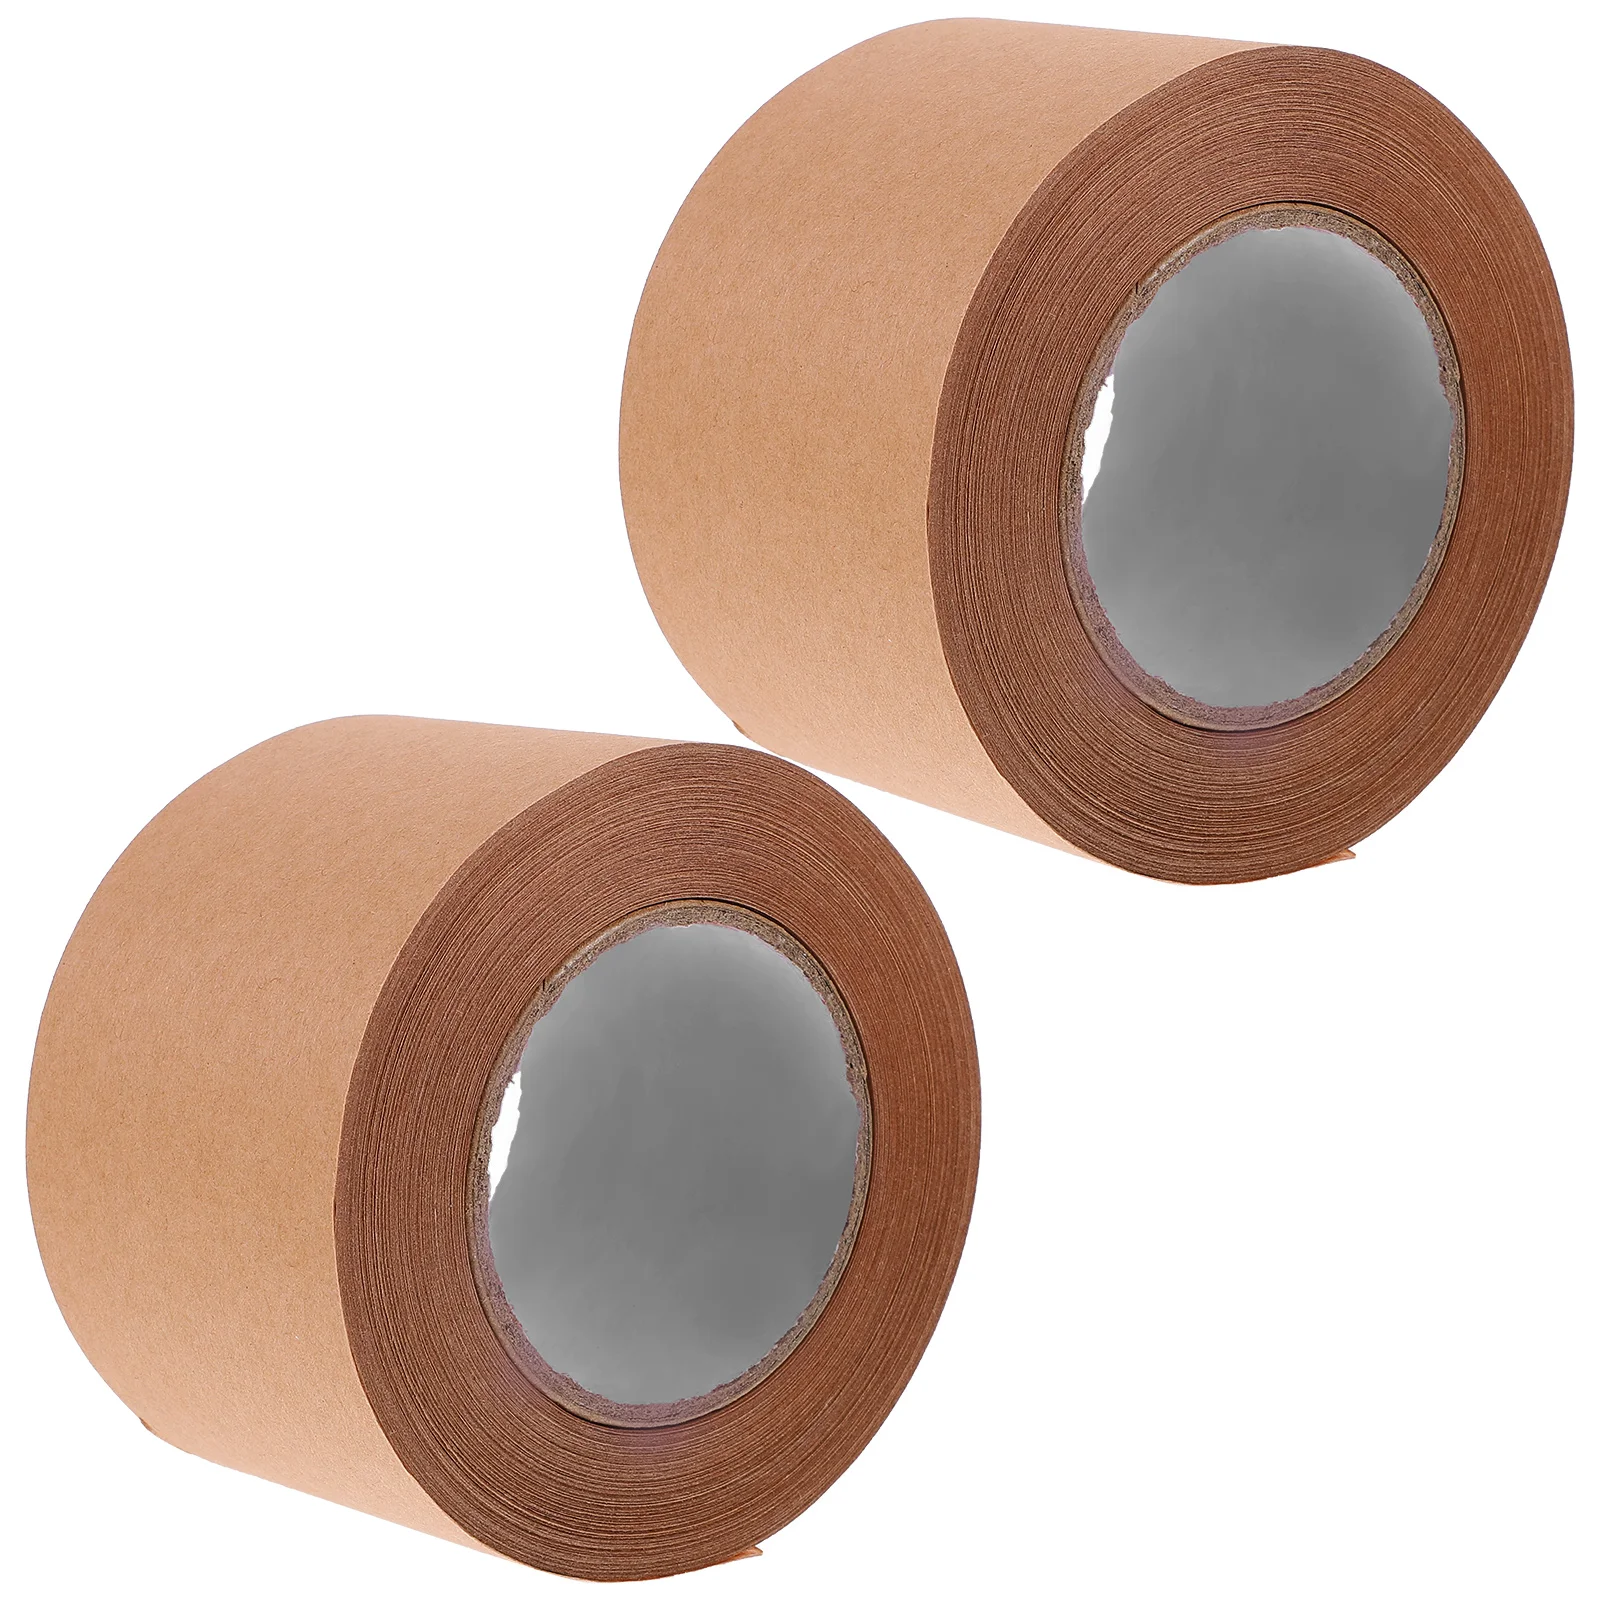 

2 Rolls of Packing Shipping Tape Multi-use Kraft Sealing Tape Writable Paper Delivery Packing Tape